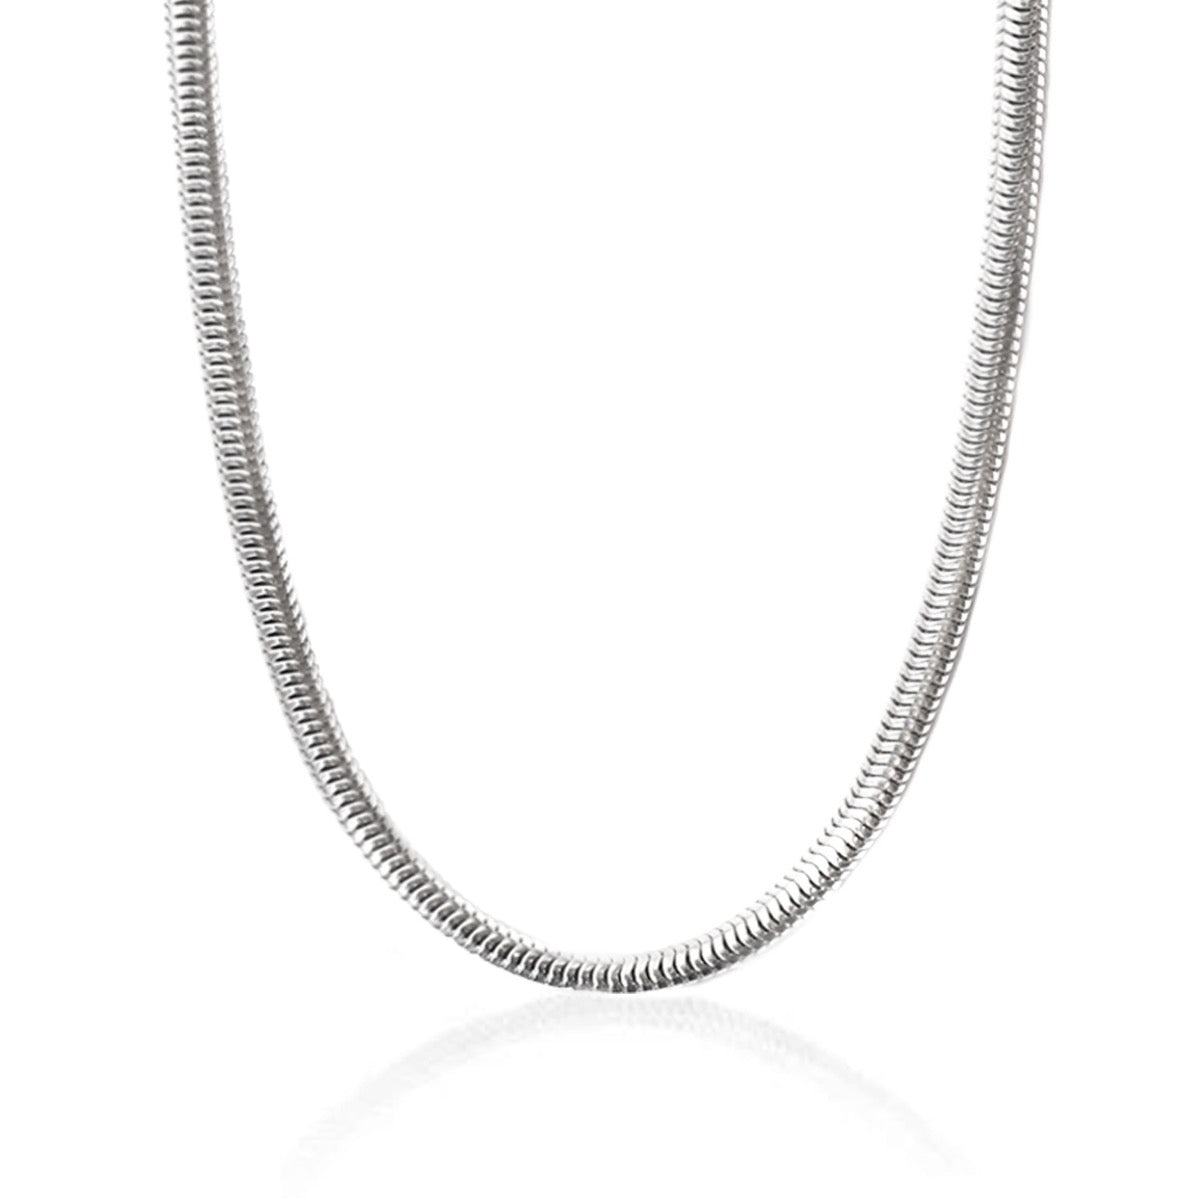 Heavy Sterling Silver Snake Chain Necklace | Hersey & Son Silversmiths